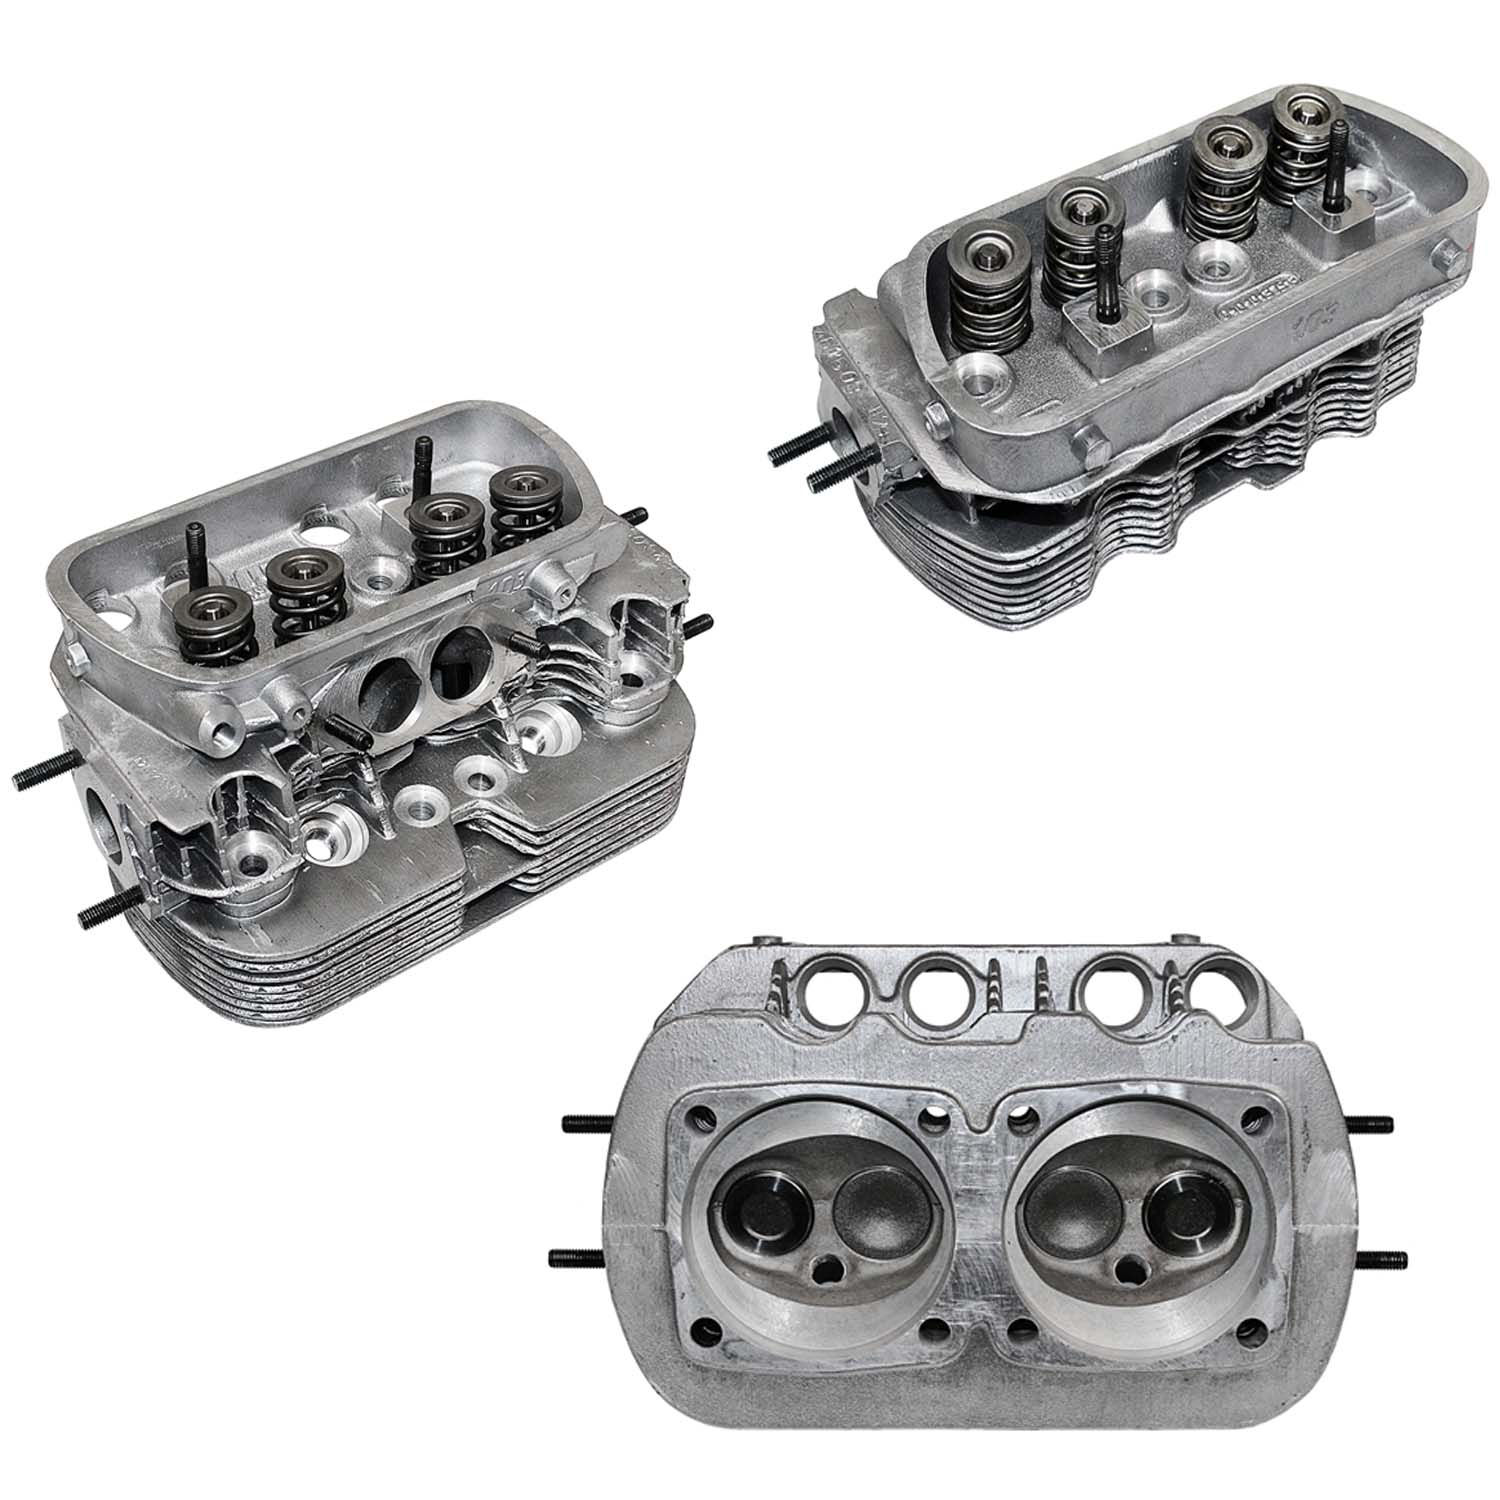 Cylinder Heads - Stock